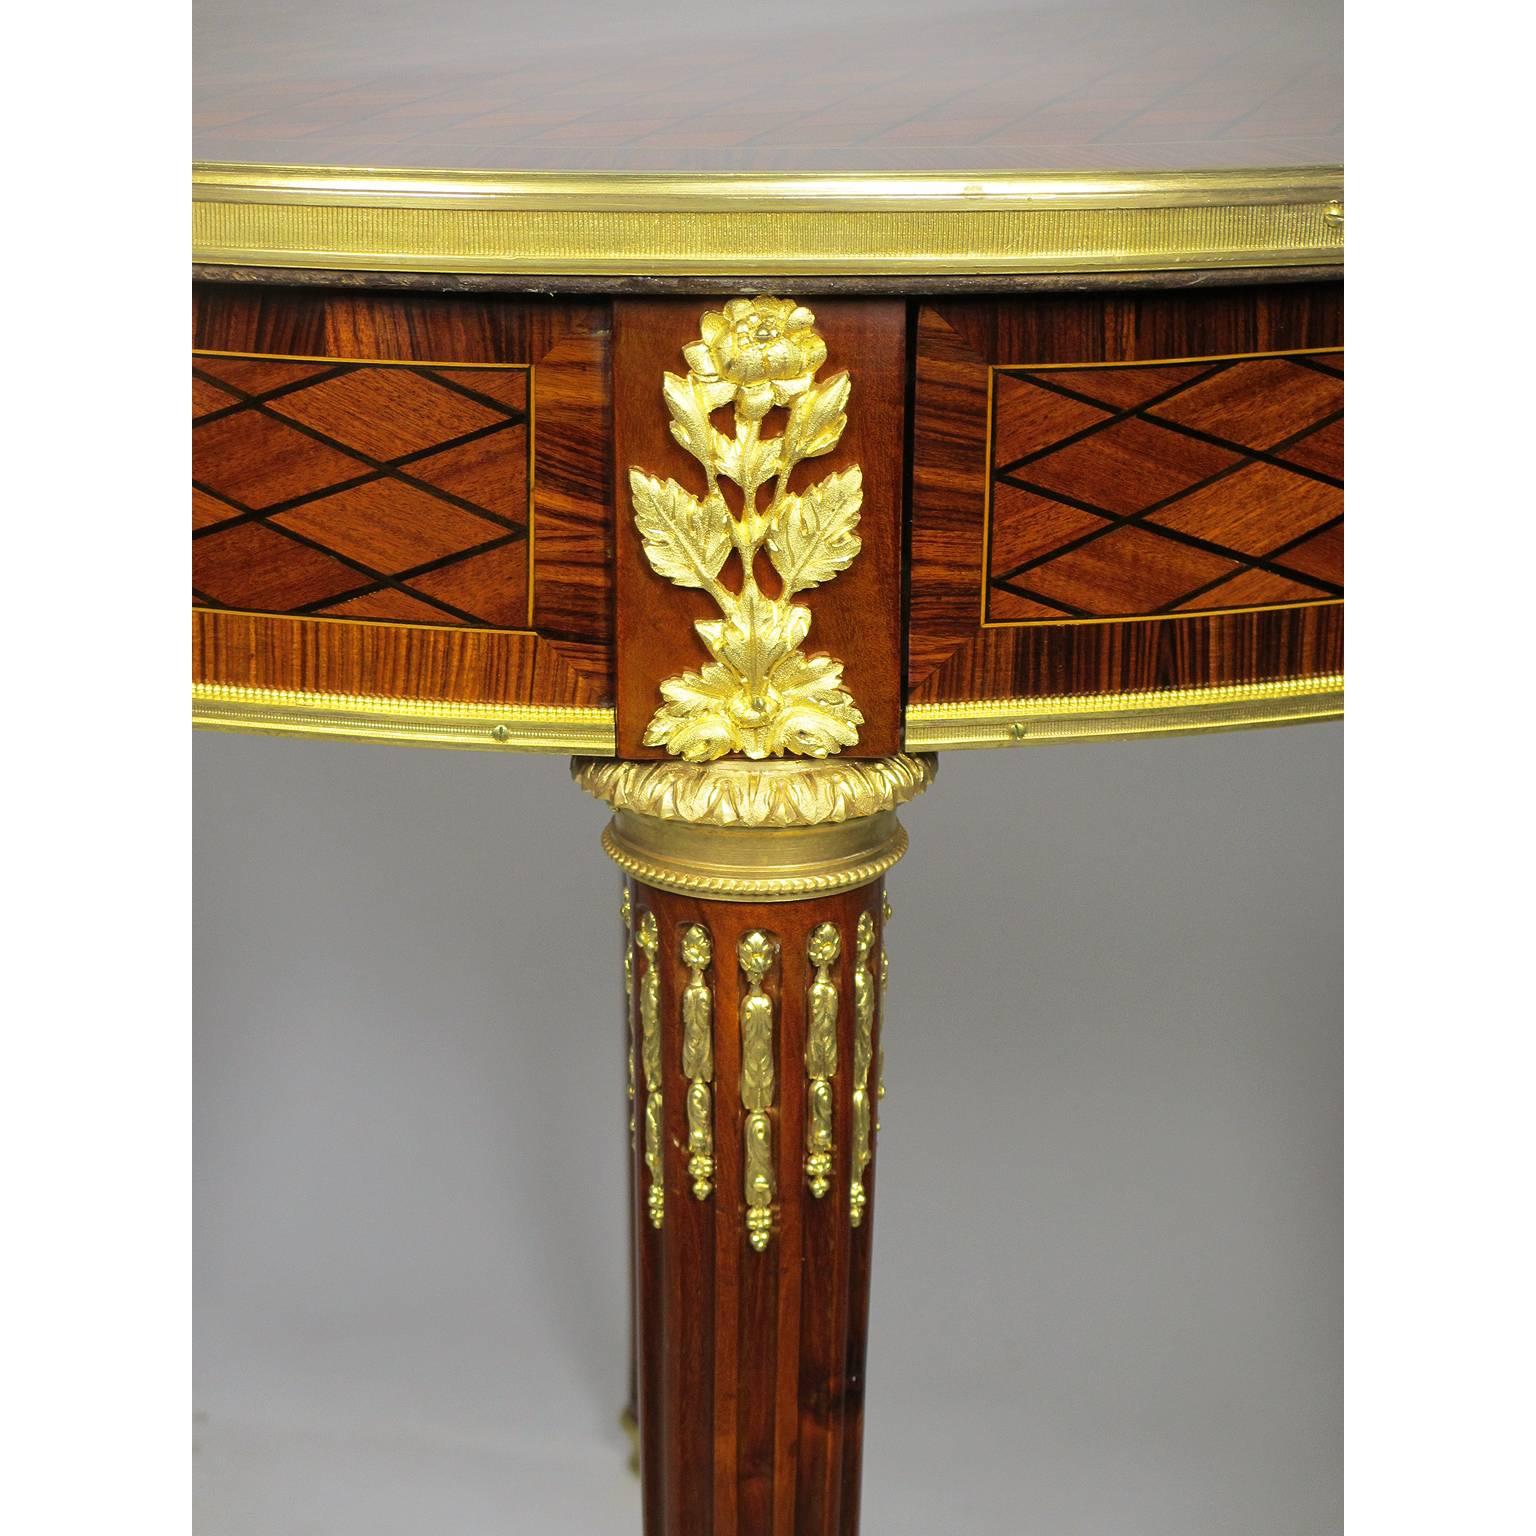 Early 20th Century A French 19th-20th Century Louis XVI Style Ormolu-Mounted Guéridon Side Table For Sale